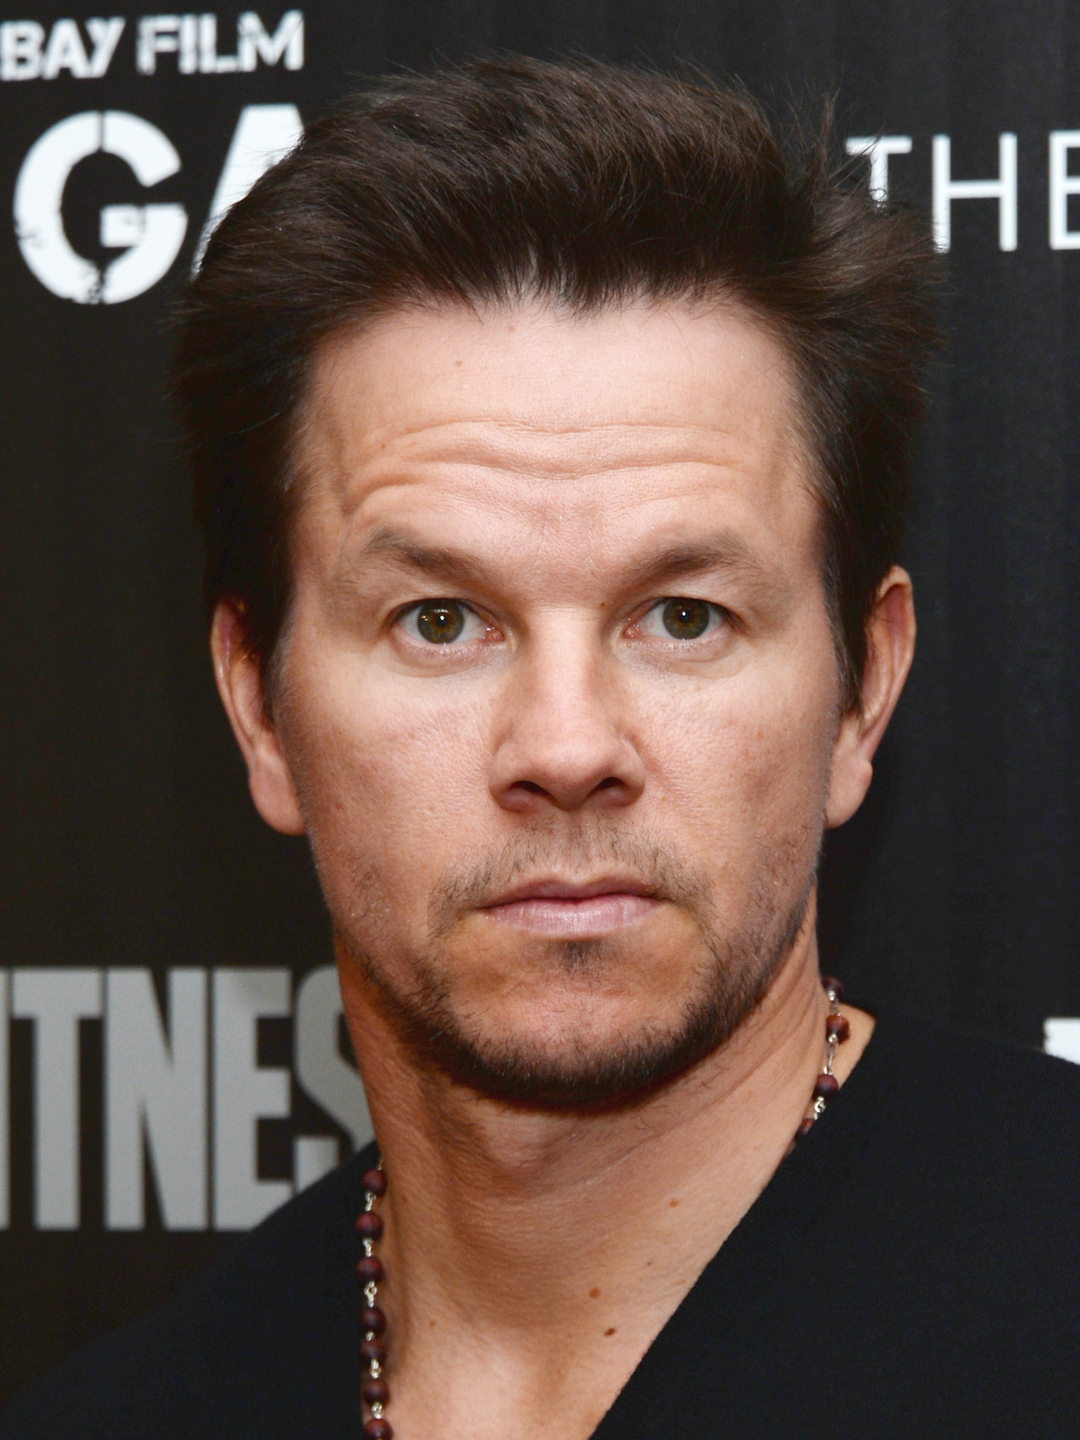 Mark Wahlberg story of success